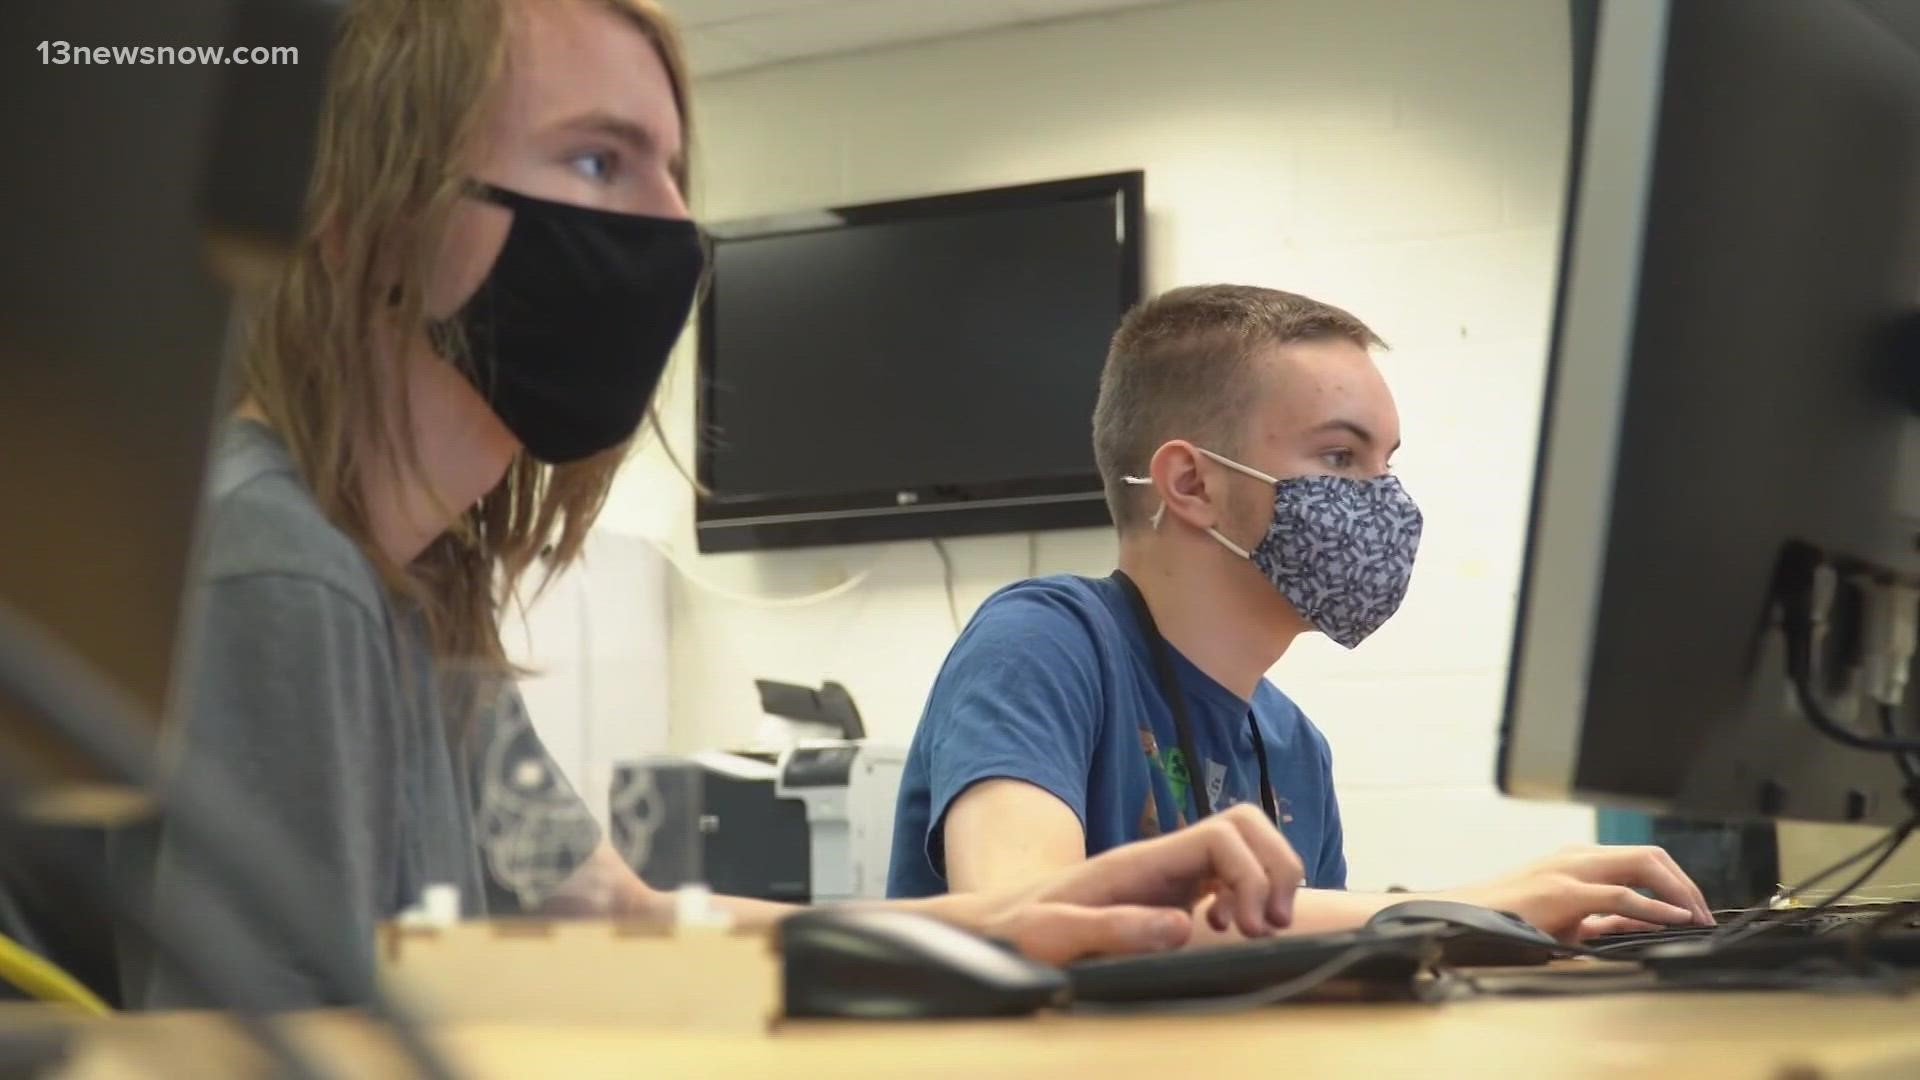 Students in Virginia no longer have to wear masks in school. The change could be jarring for some, especially if they’re among those who still are wearing them.